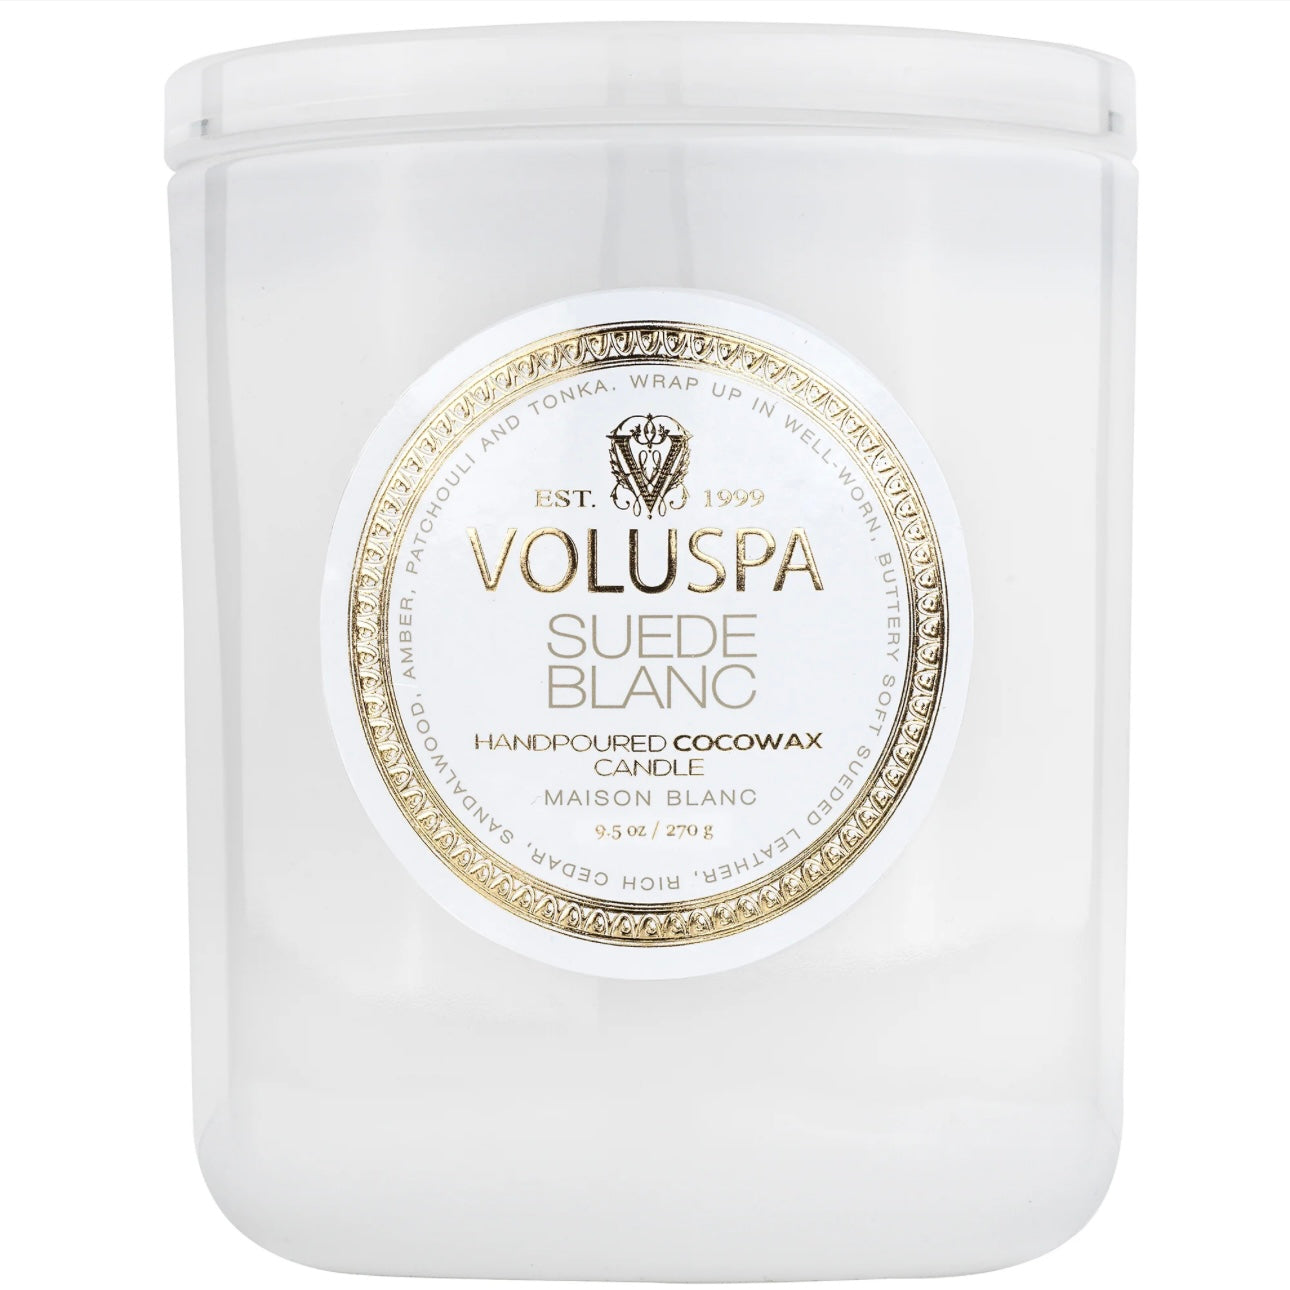 Voluspa Suede Blanc Classic Boxed Candle